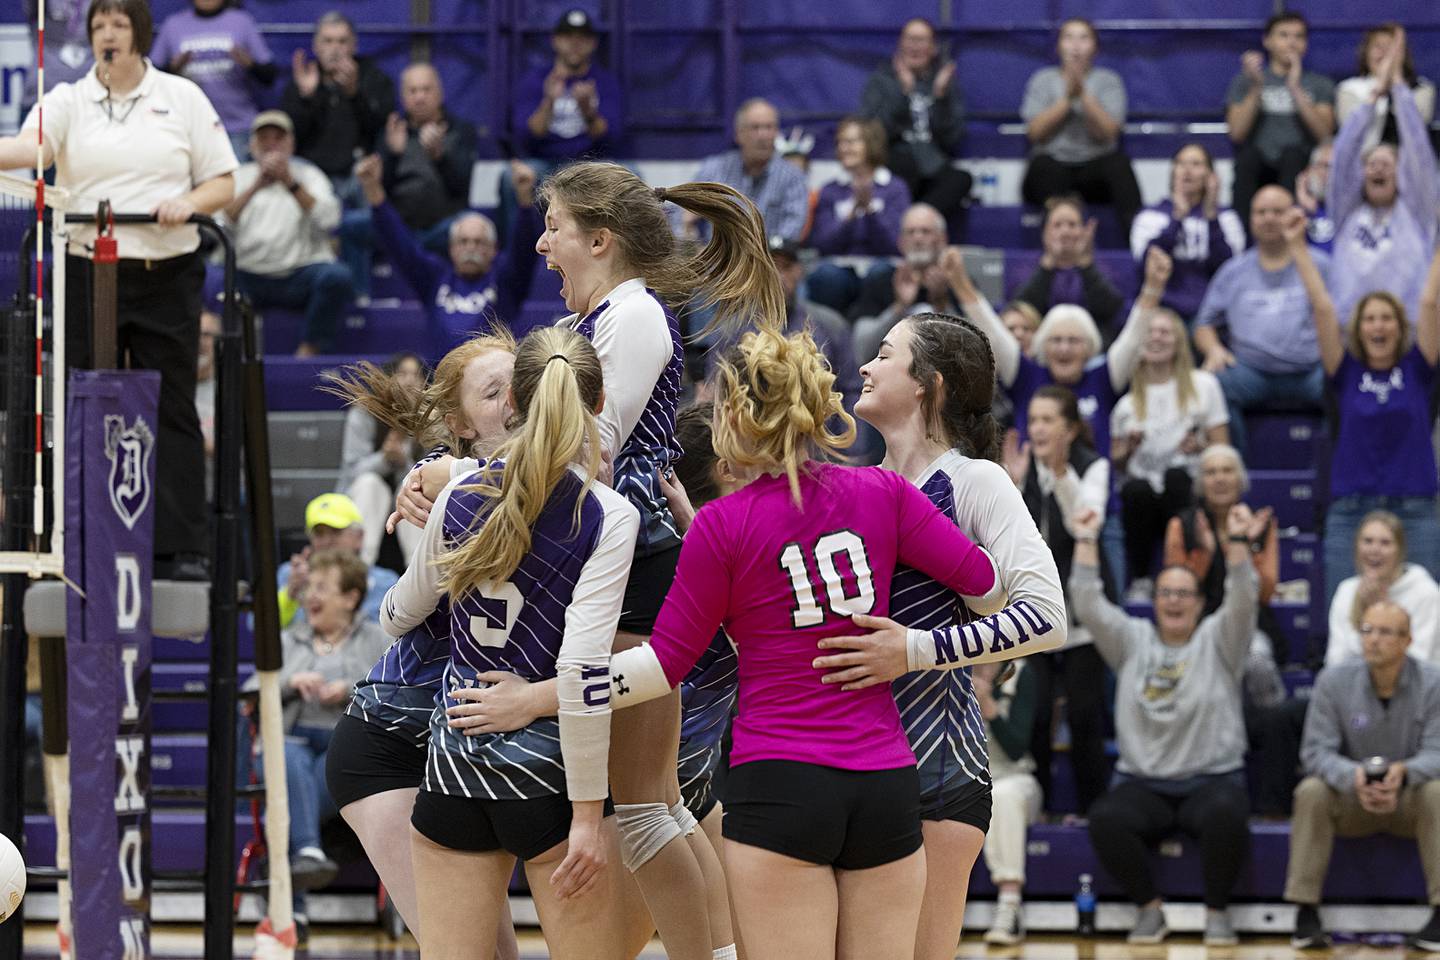 Dixon celebrates winning game one Thursday, Oct. 27, 2022 in the volleyball regional final against Galesburg. The Duchesses went on to win the match.